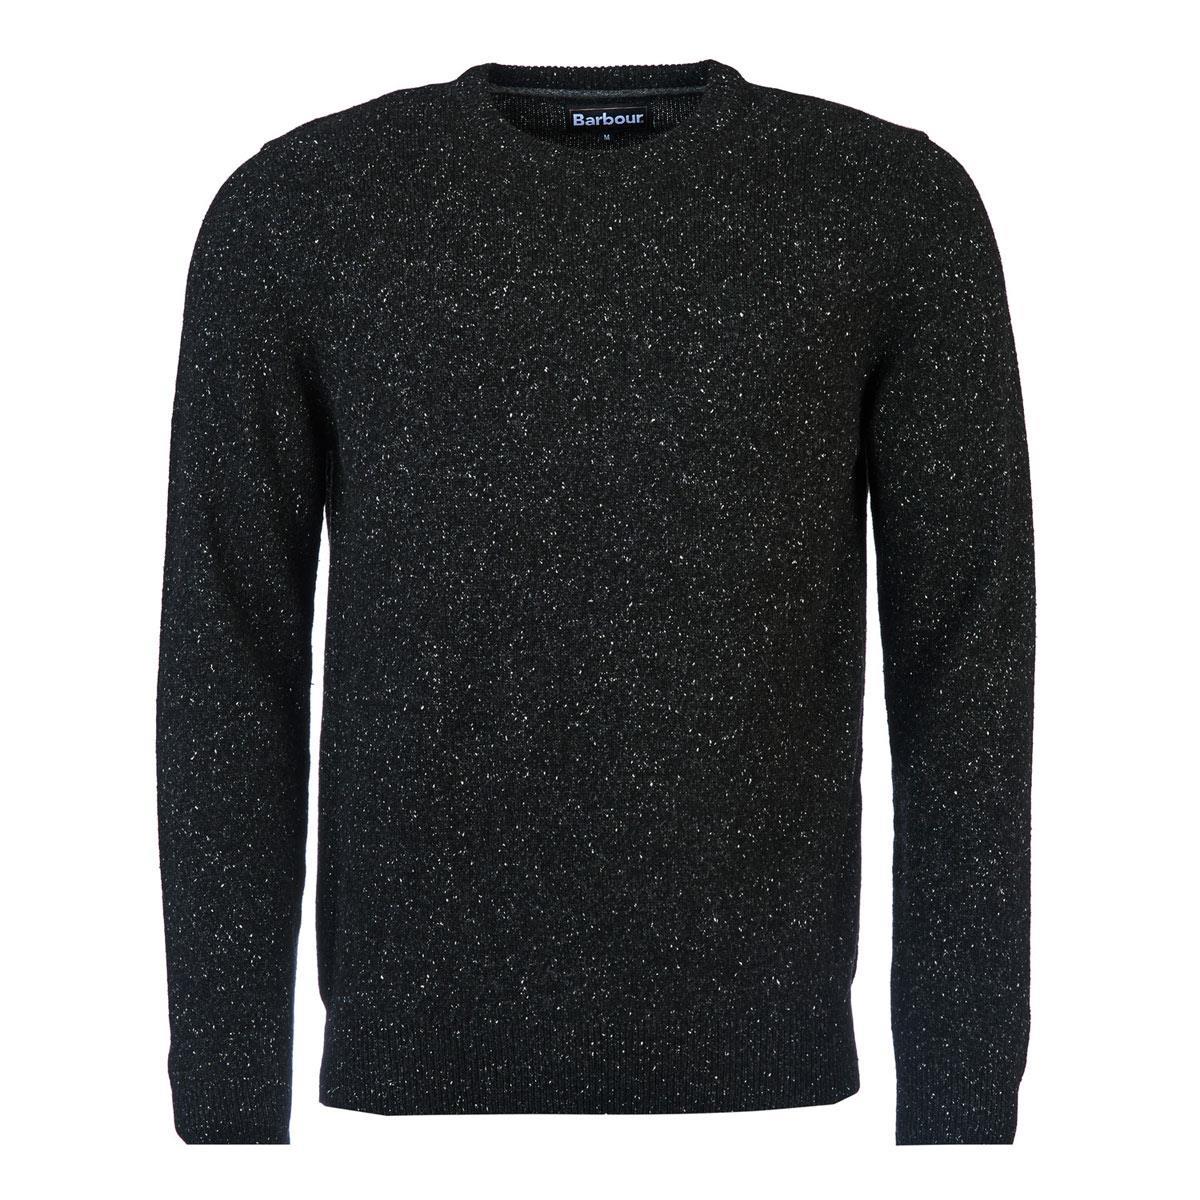 What is the fit of the Barbour Tisbury Crew Neck Sweater?